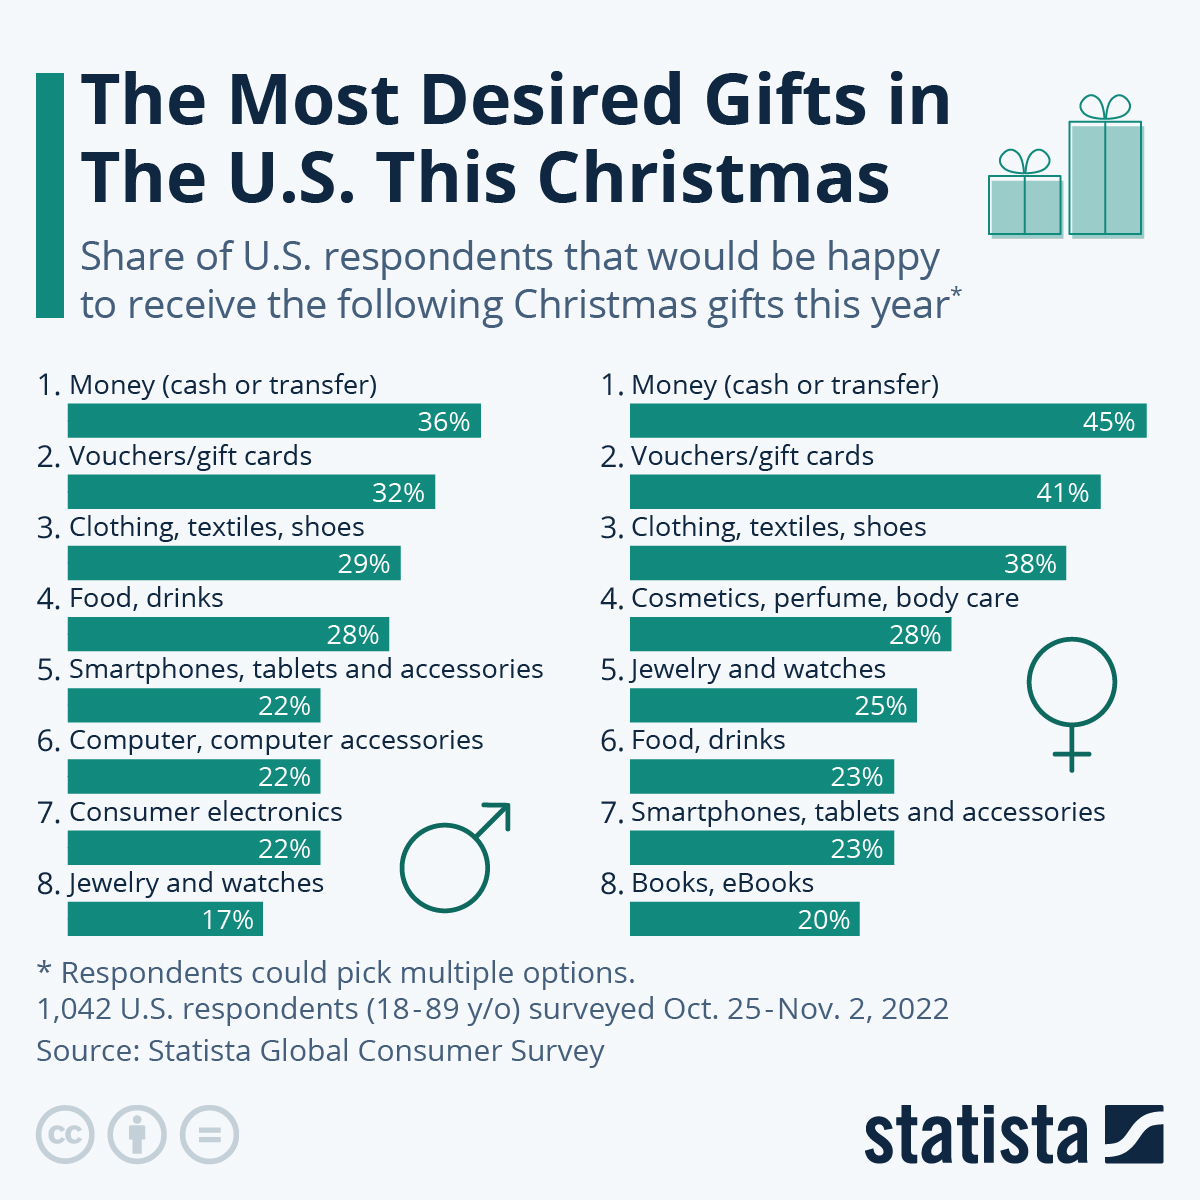 The Most Preferred Christmas Gifts in the U.S. this Season